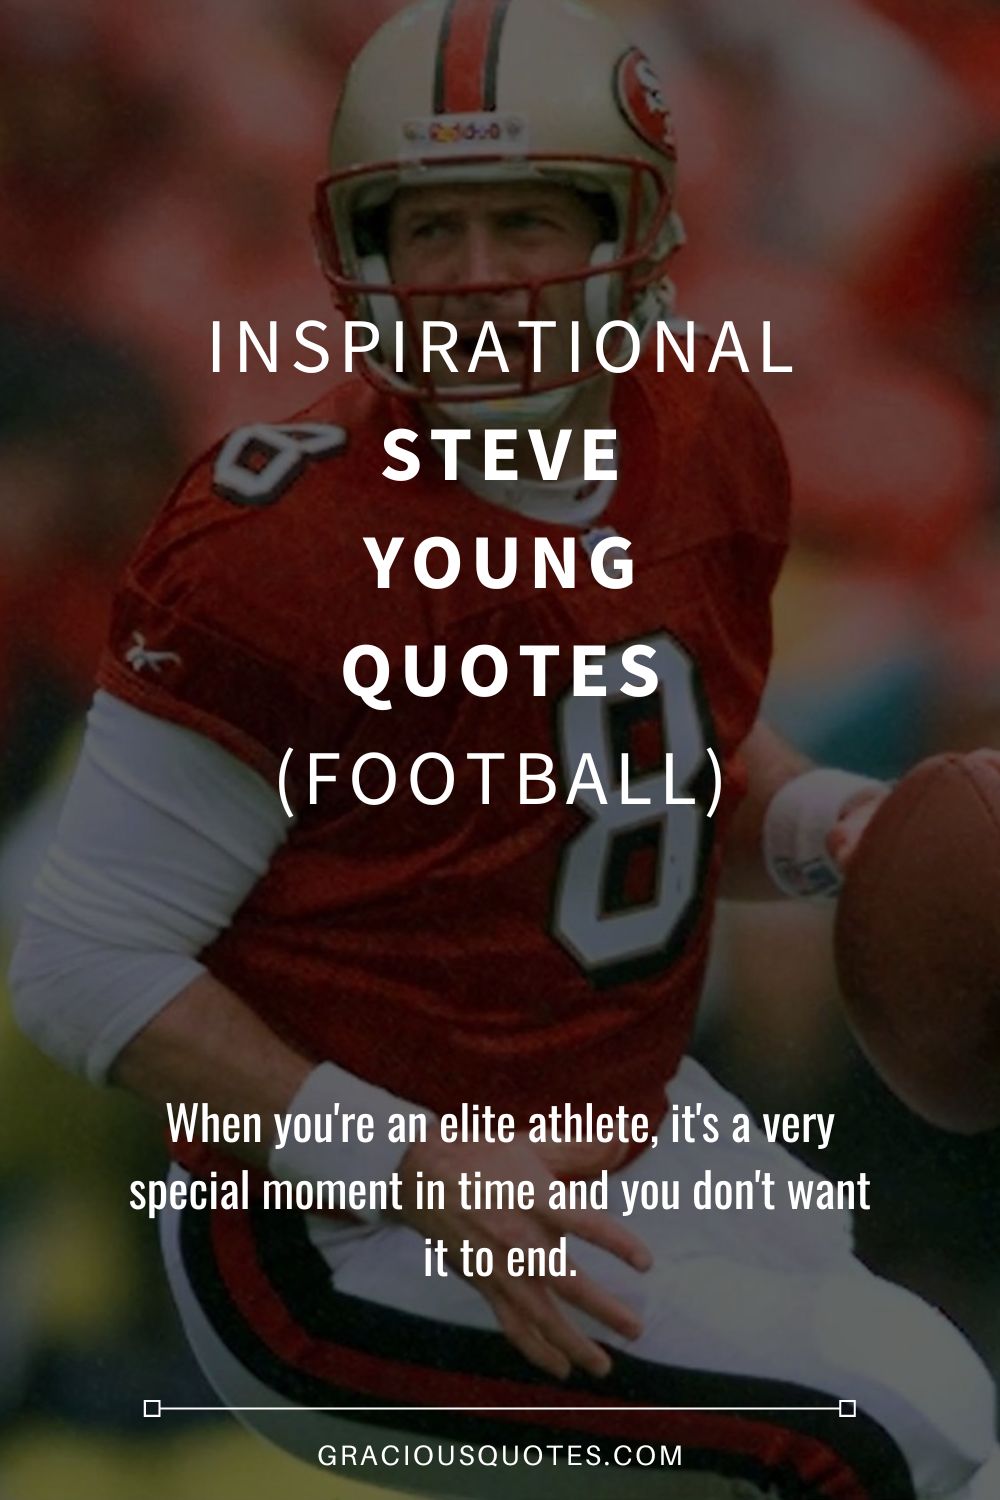 Inspirational Steve Young Quotes (FOOTBALL) - Gracious Quotes